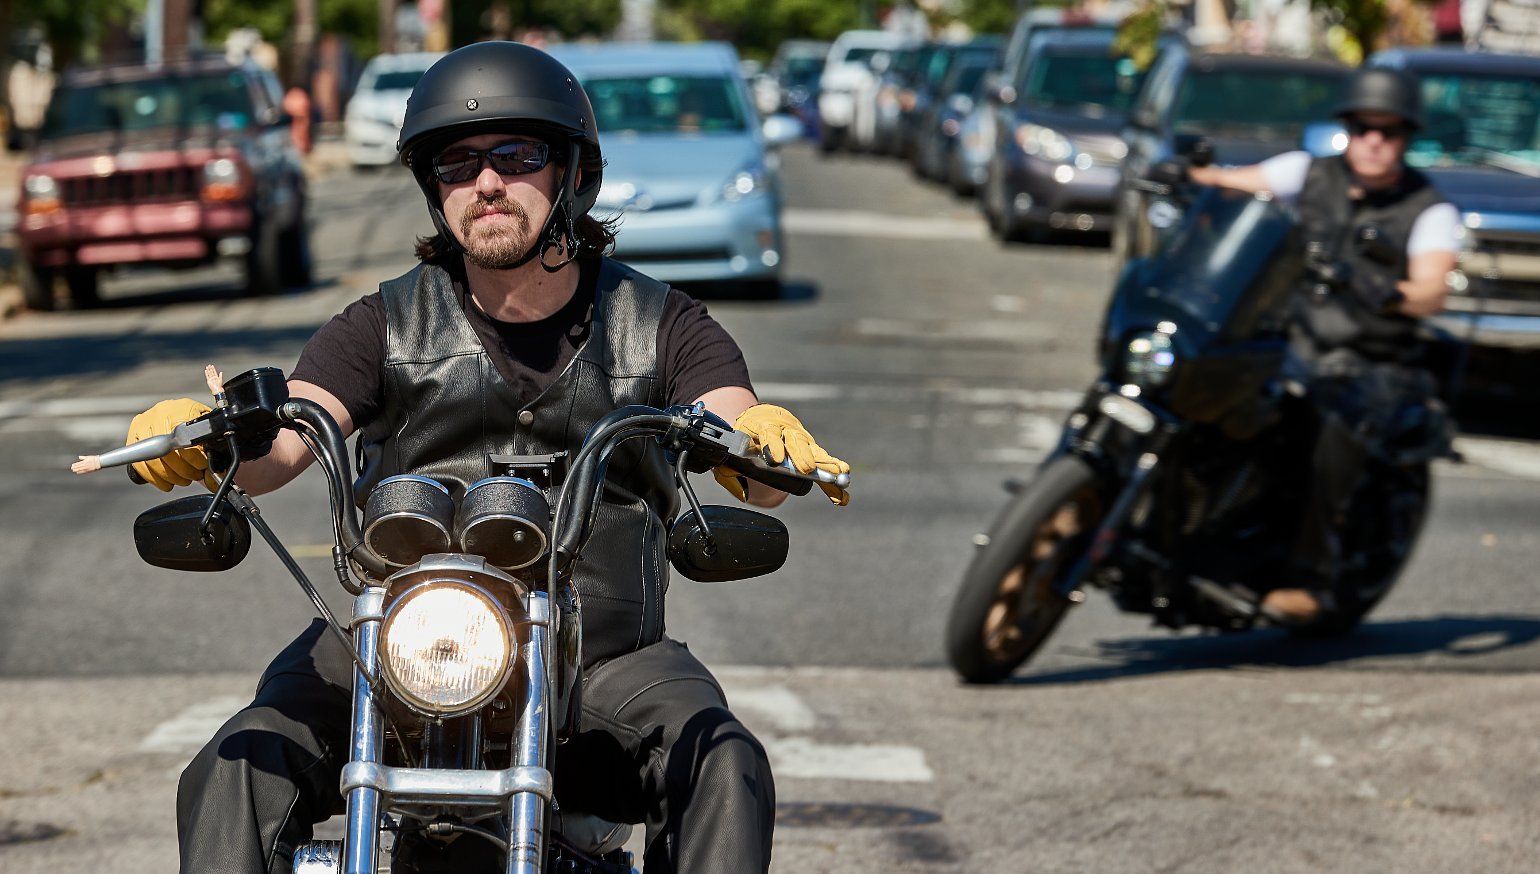 How to survive on the street on a motorcycle: A look at the statistics